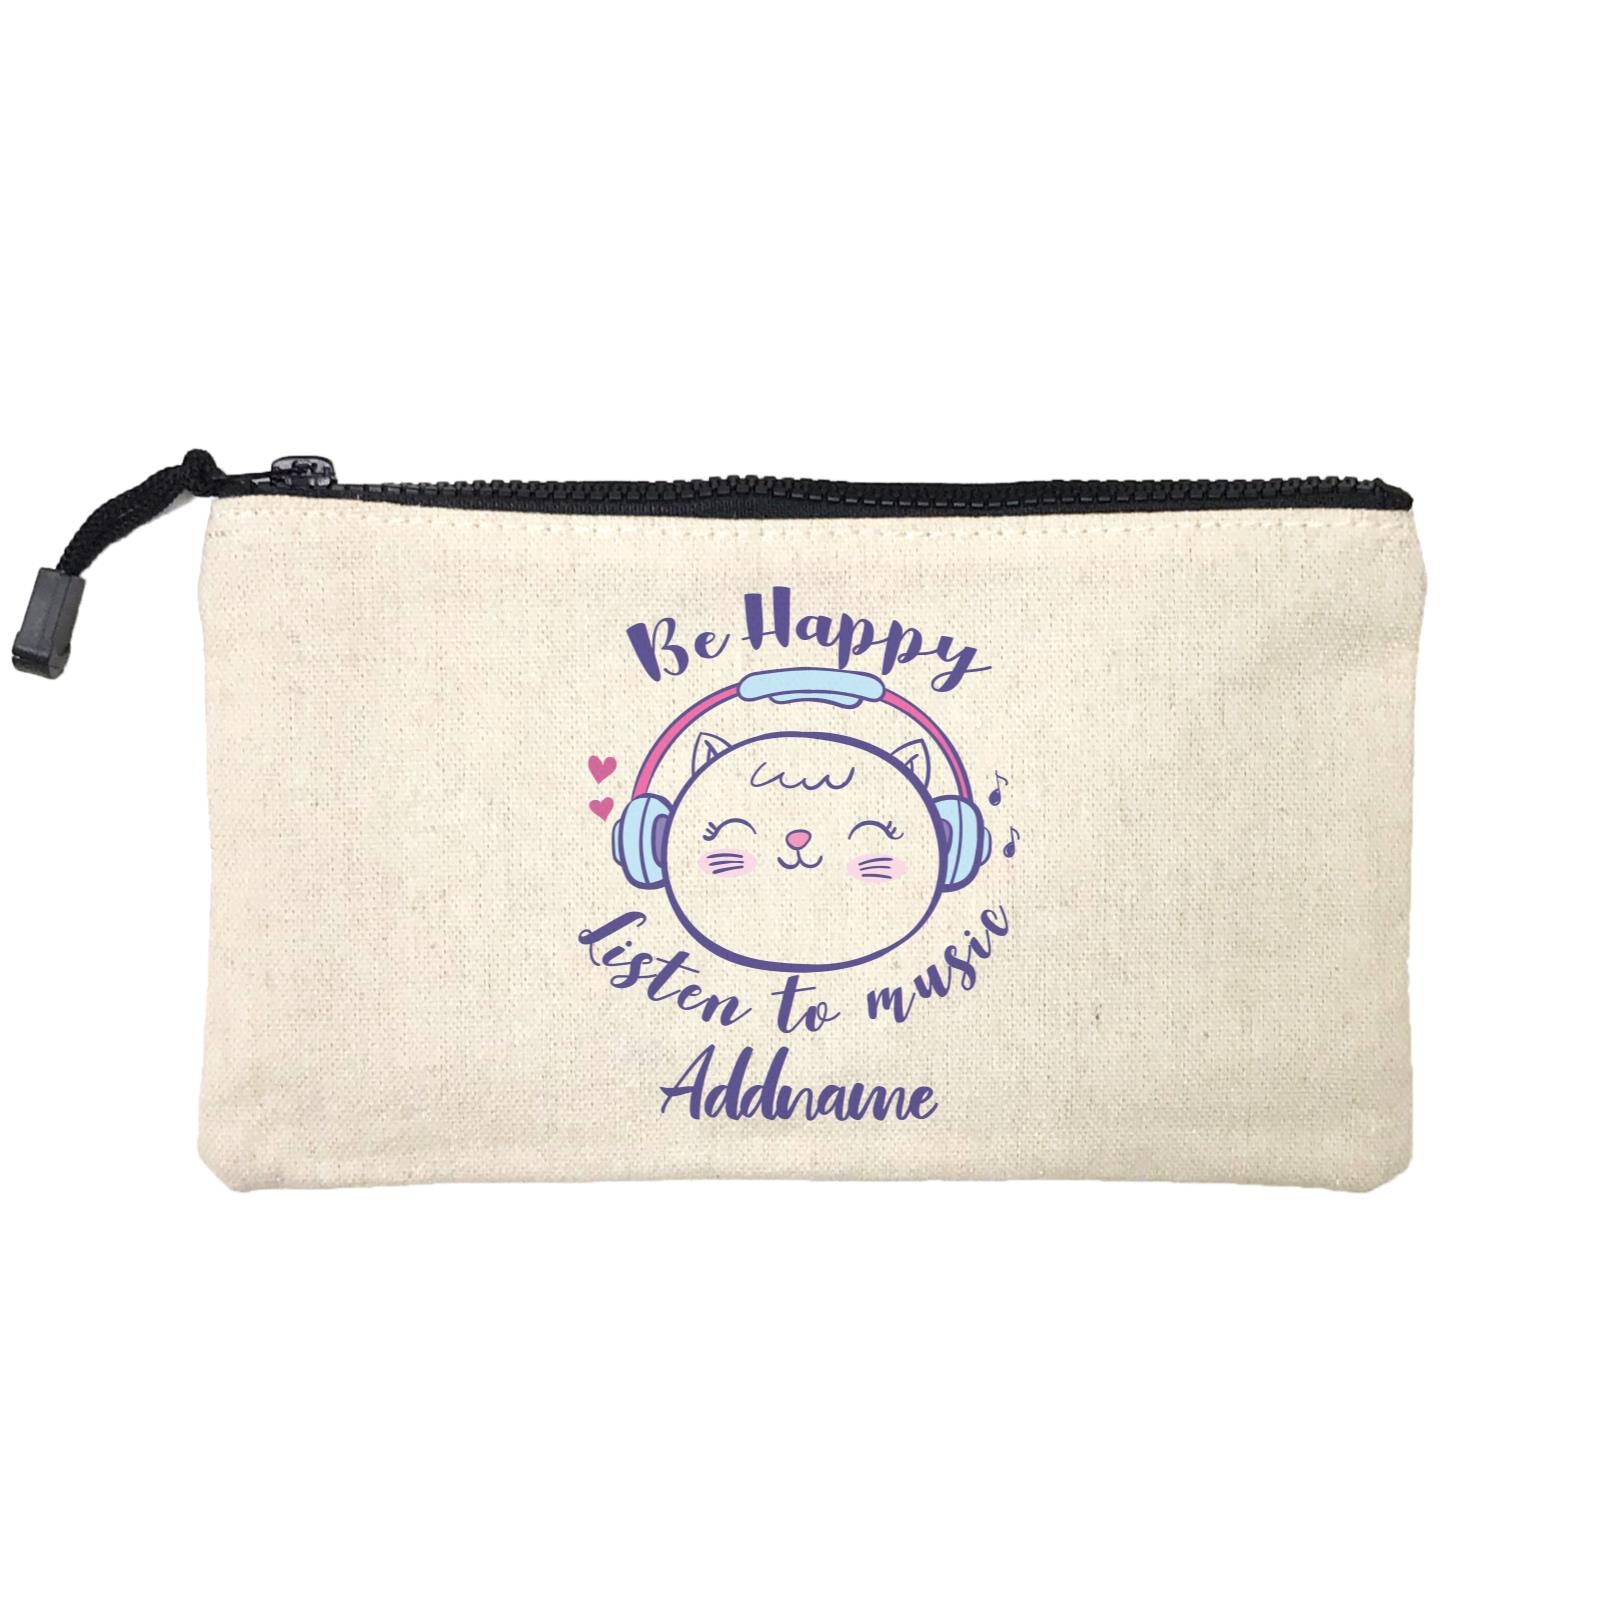 Cool Cute Animals Cats Be Happy Listen To Music Addname Mini Accessories Stationery Pouch